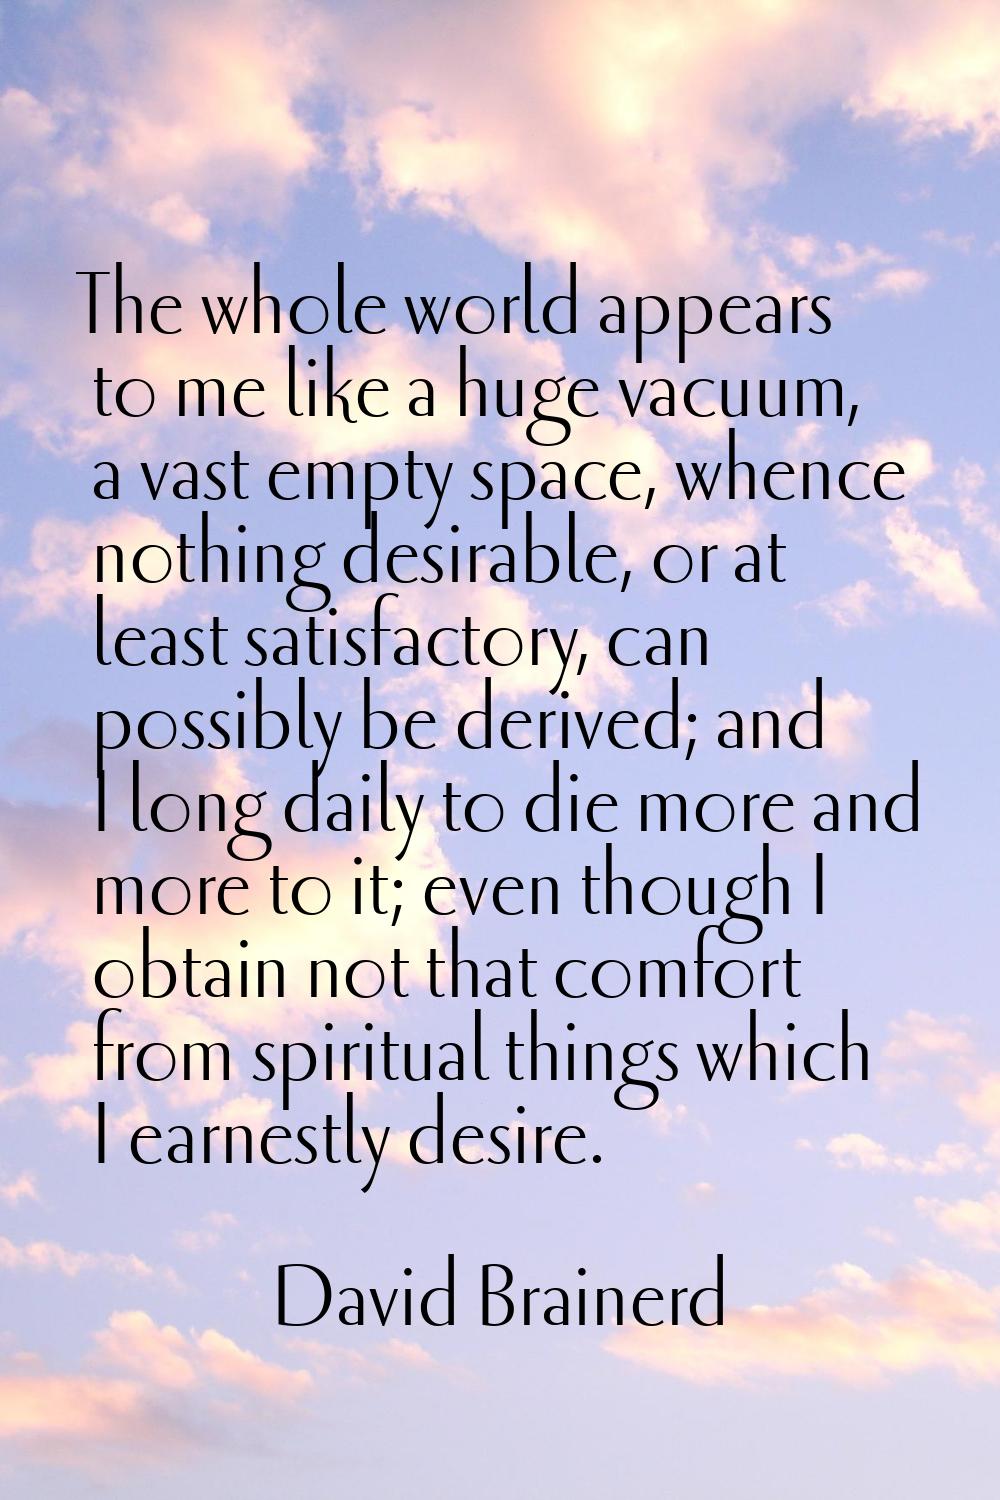 The whole world appears to me like a huge vacuum, a vast empty space, whence nothing desirable, or 